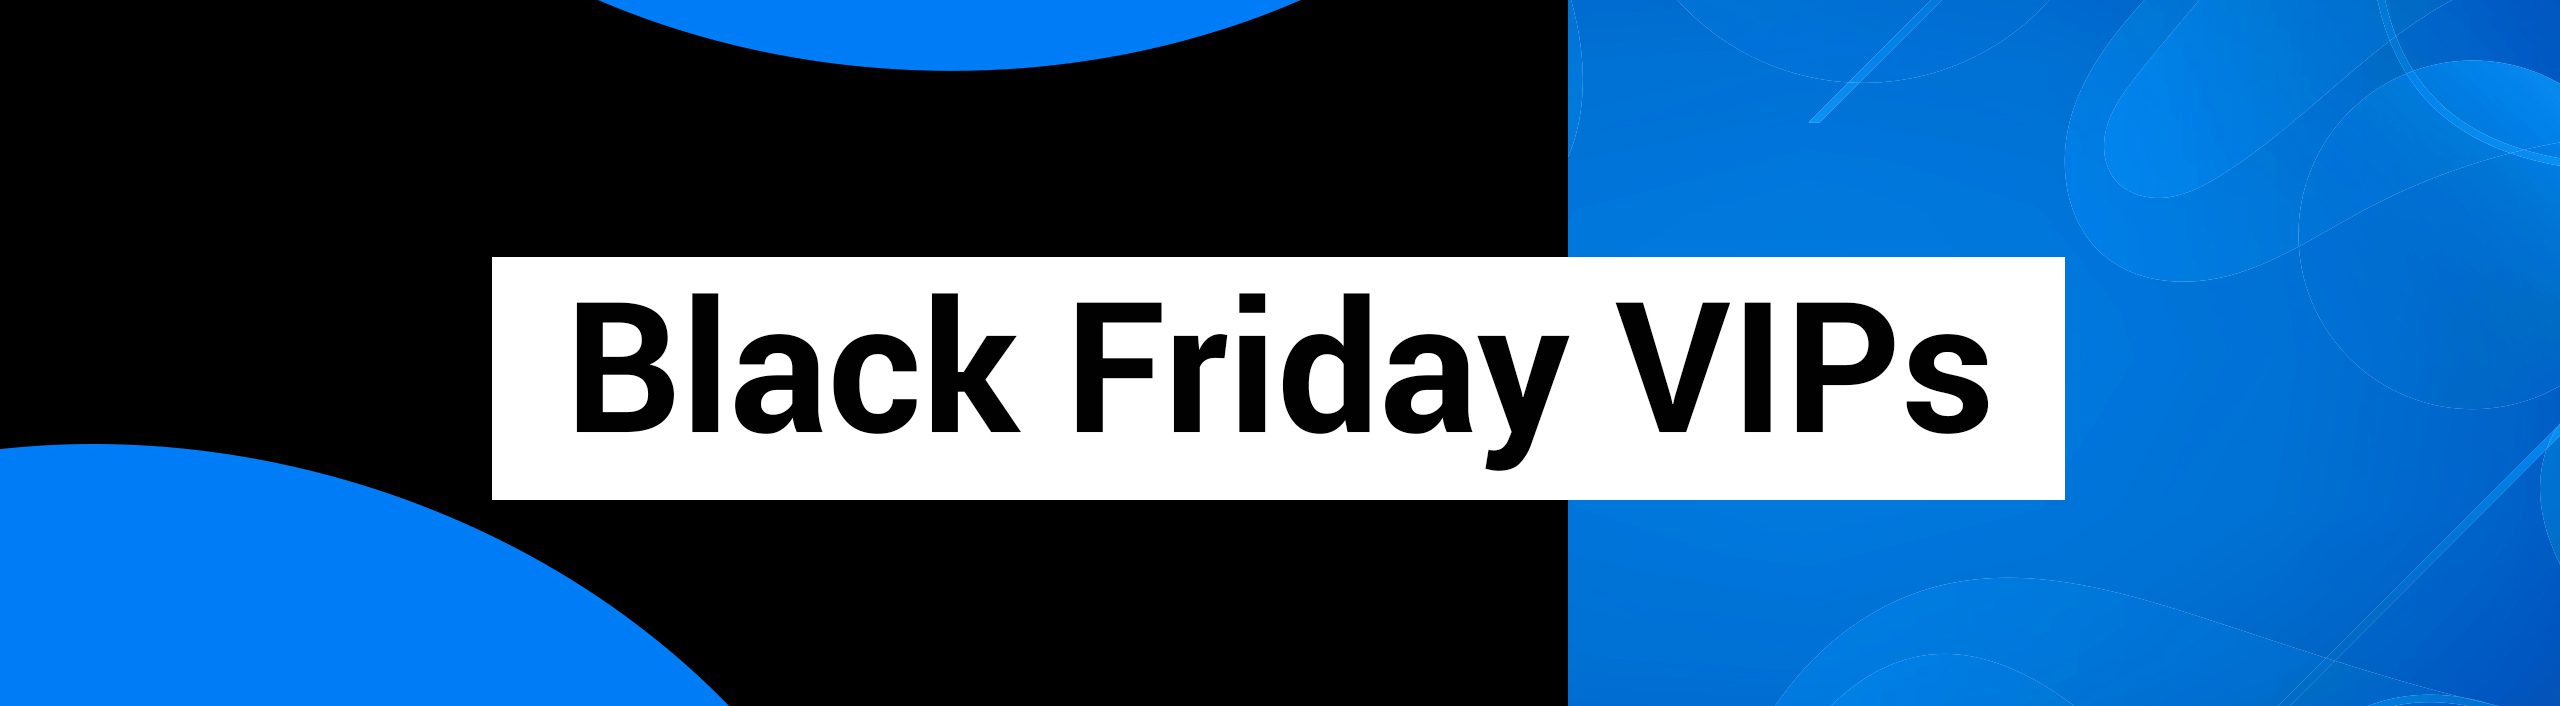 black image with blue bubbles and the text black friday vips on white background